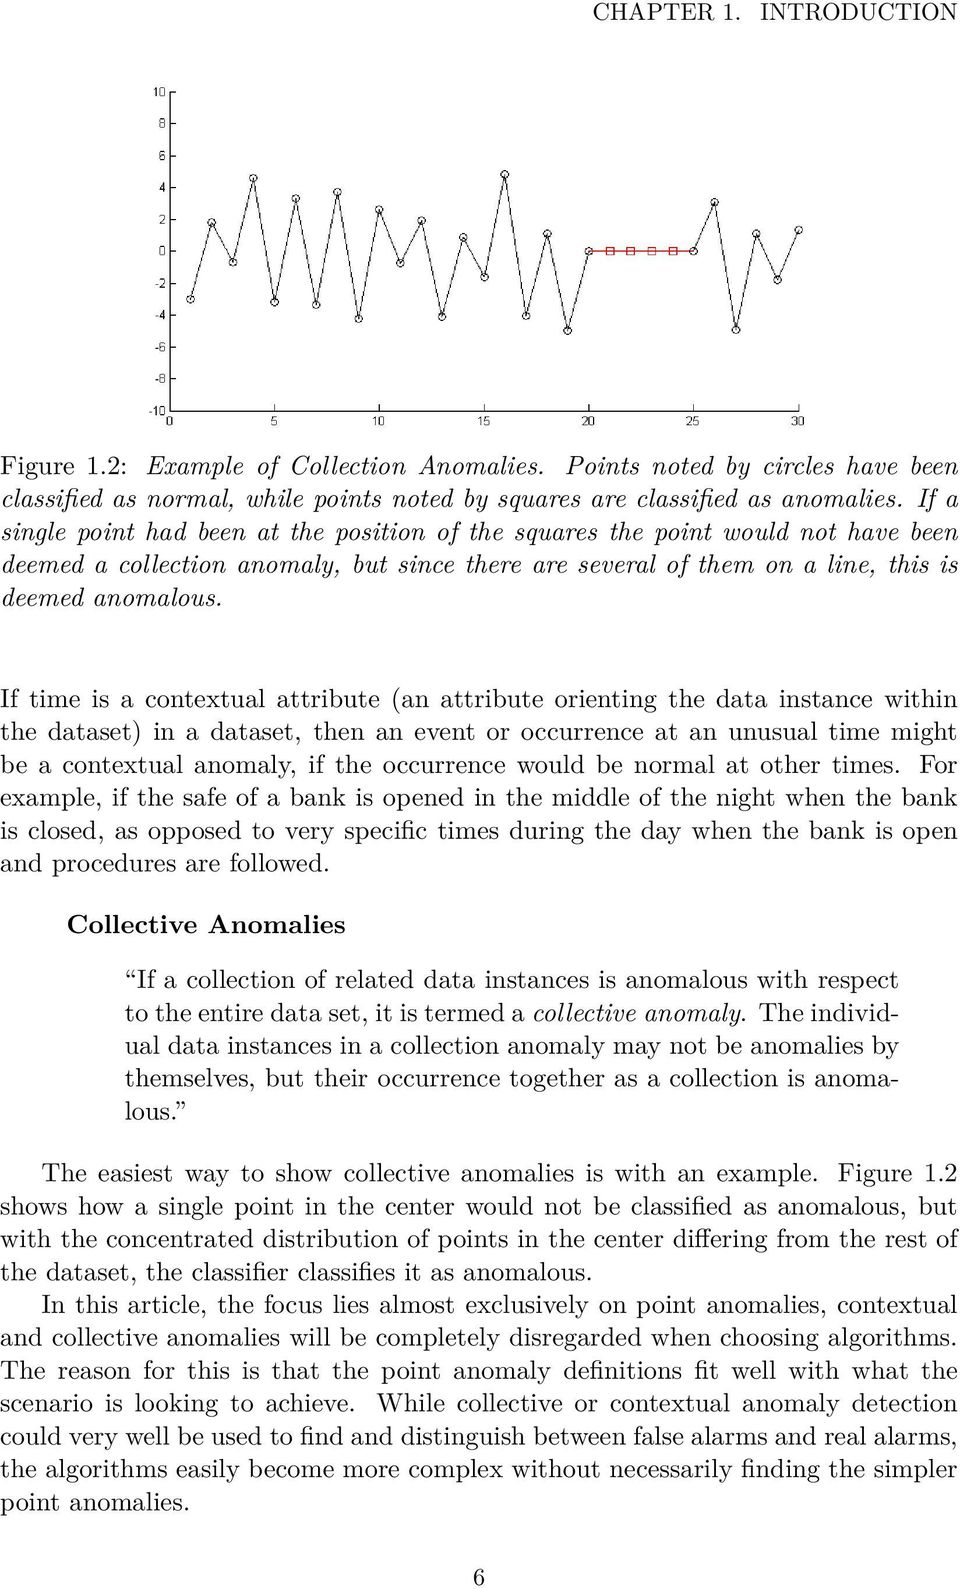 If time is a contextual attribute (an attribute orienting the data instance within the dataset) in a dataset, then an event or occurrence at an unusual time might be a contextual anomaly, if the